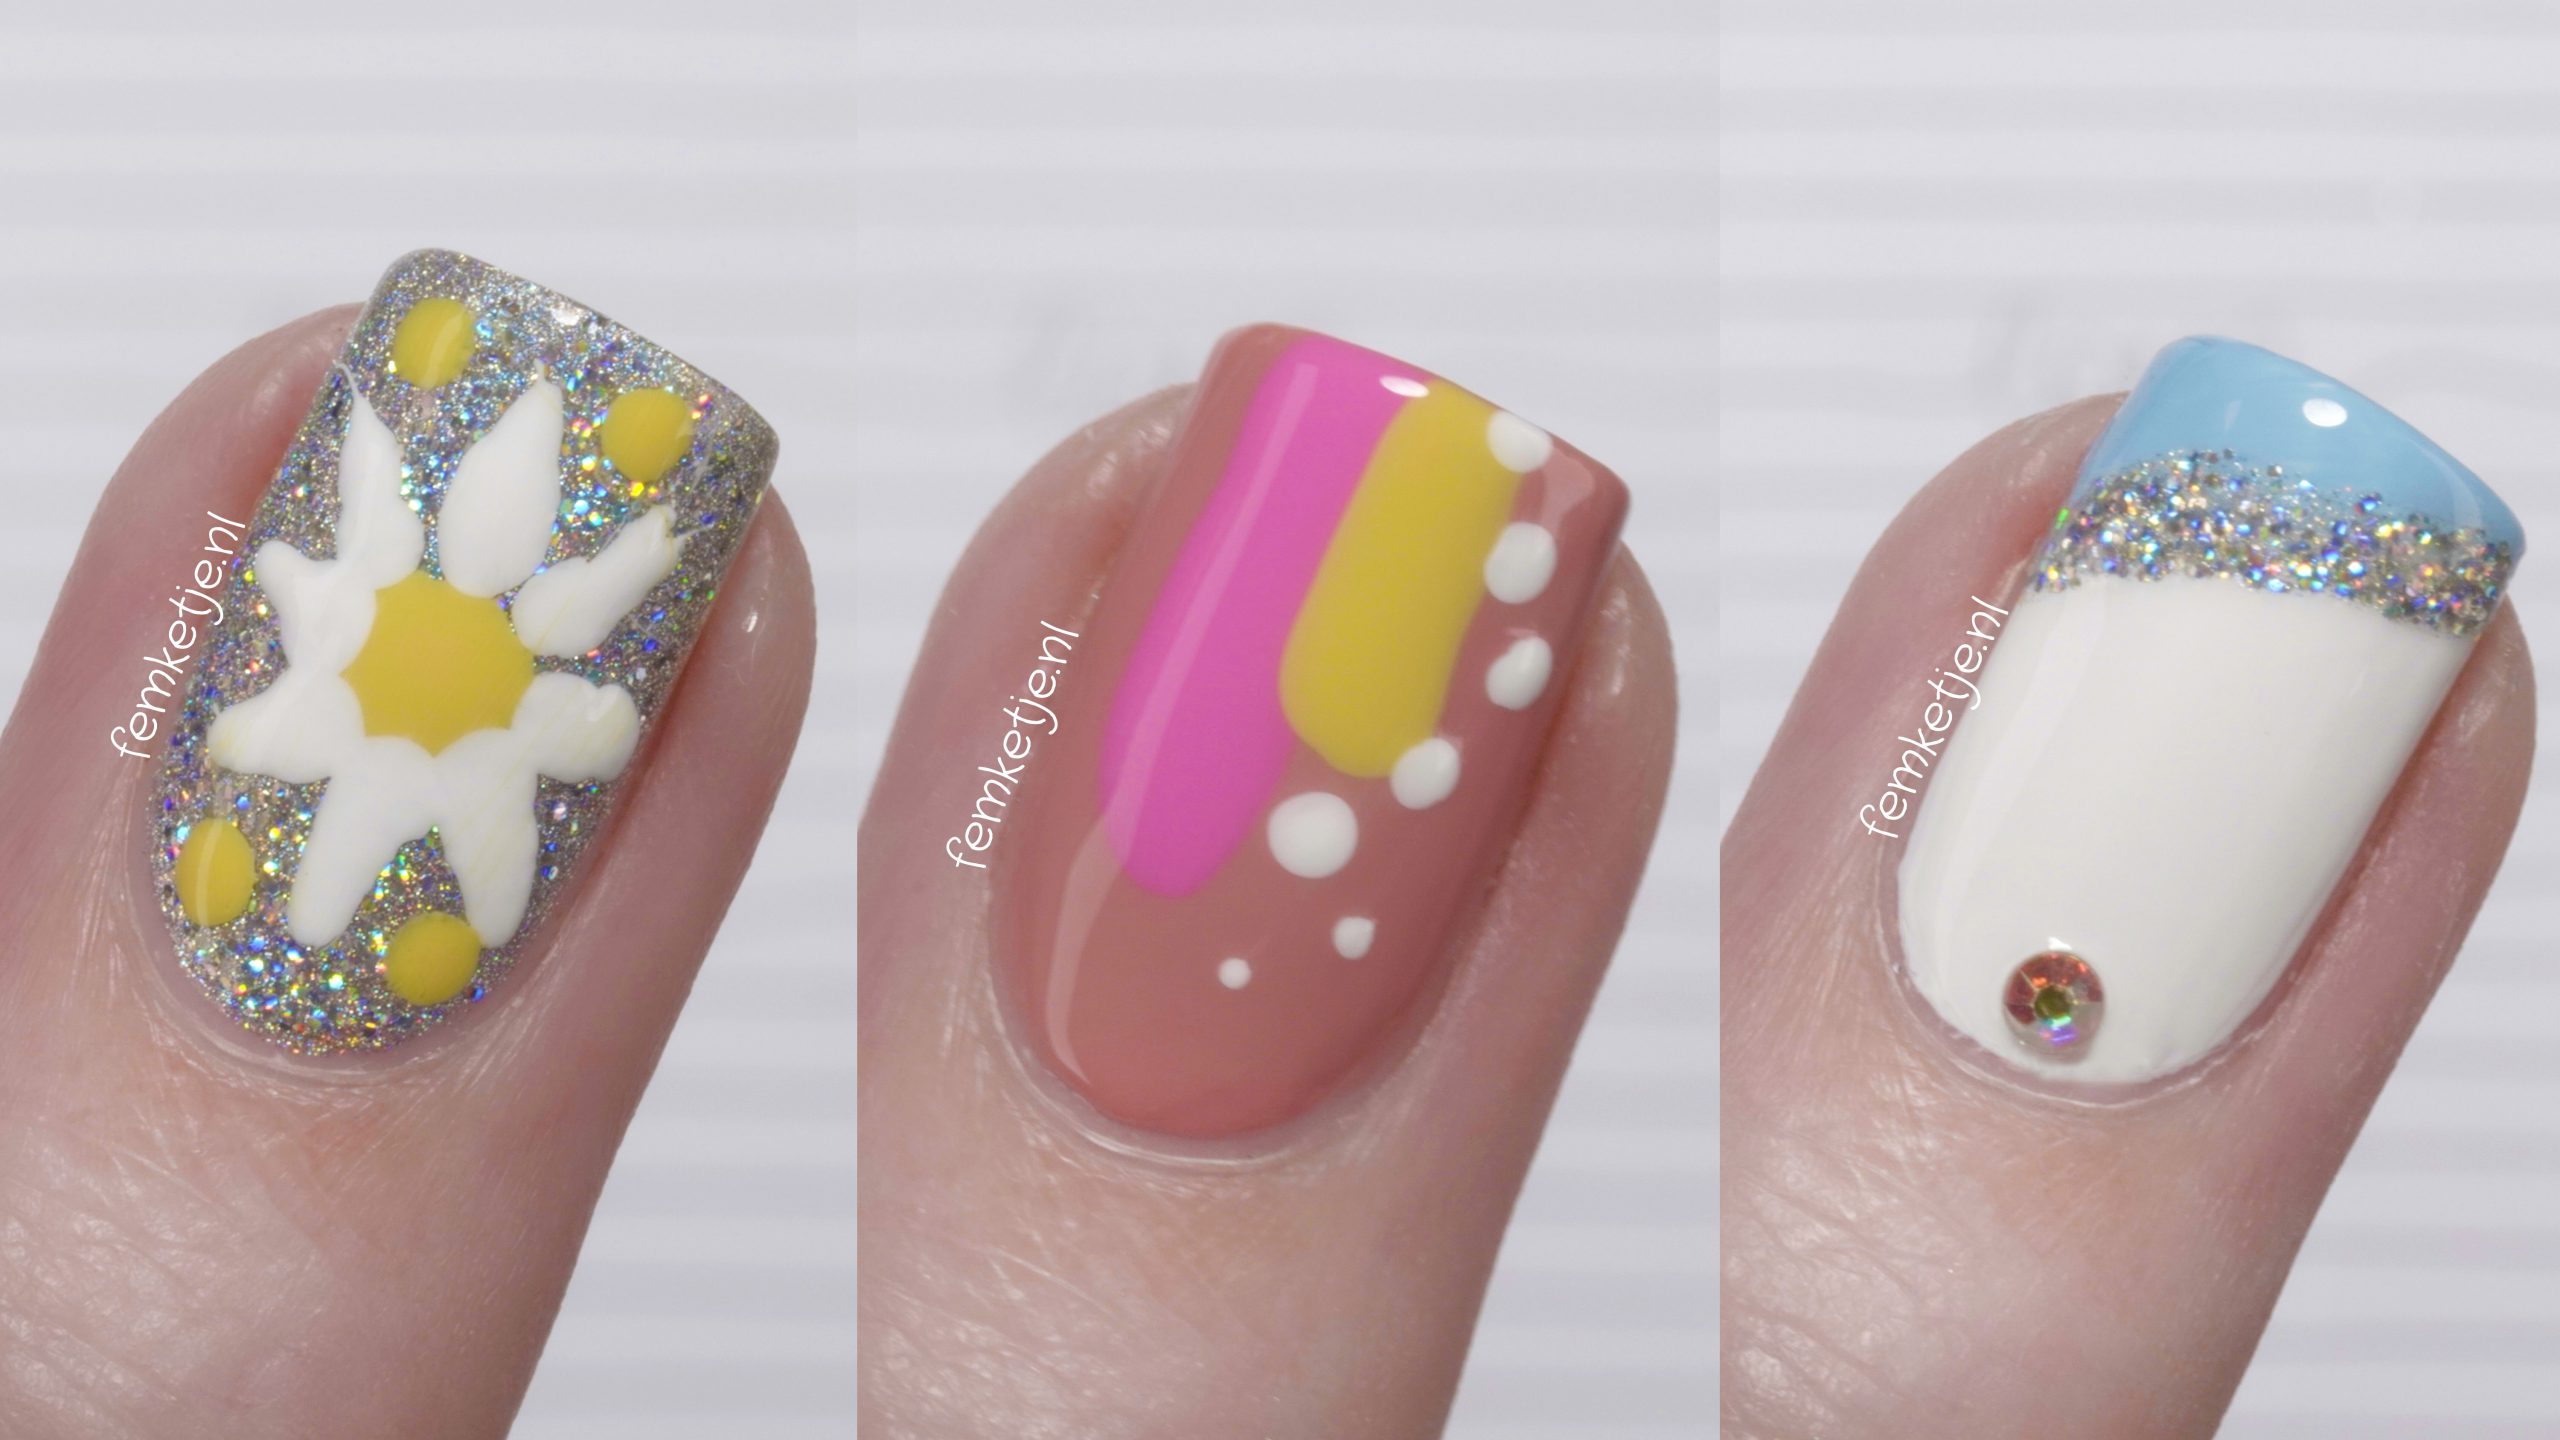 45 Pretty Short Nails For Spring & Summer : Checkered, Flower & Happy Sun